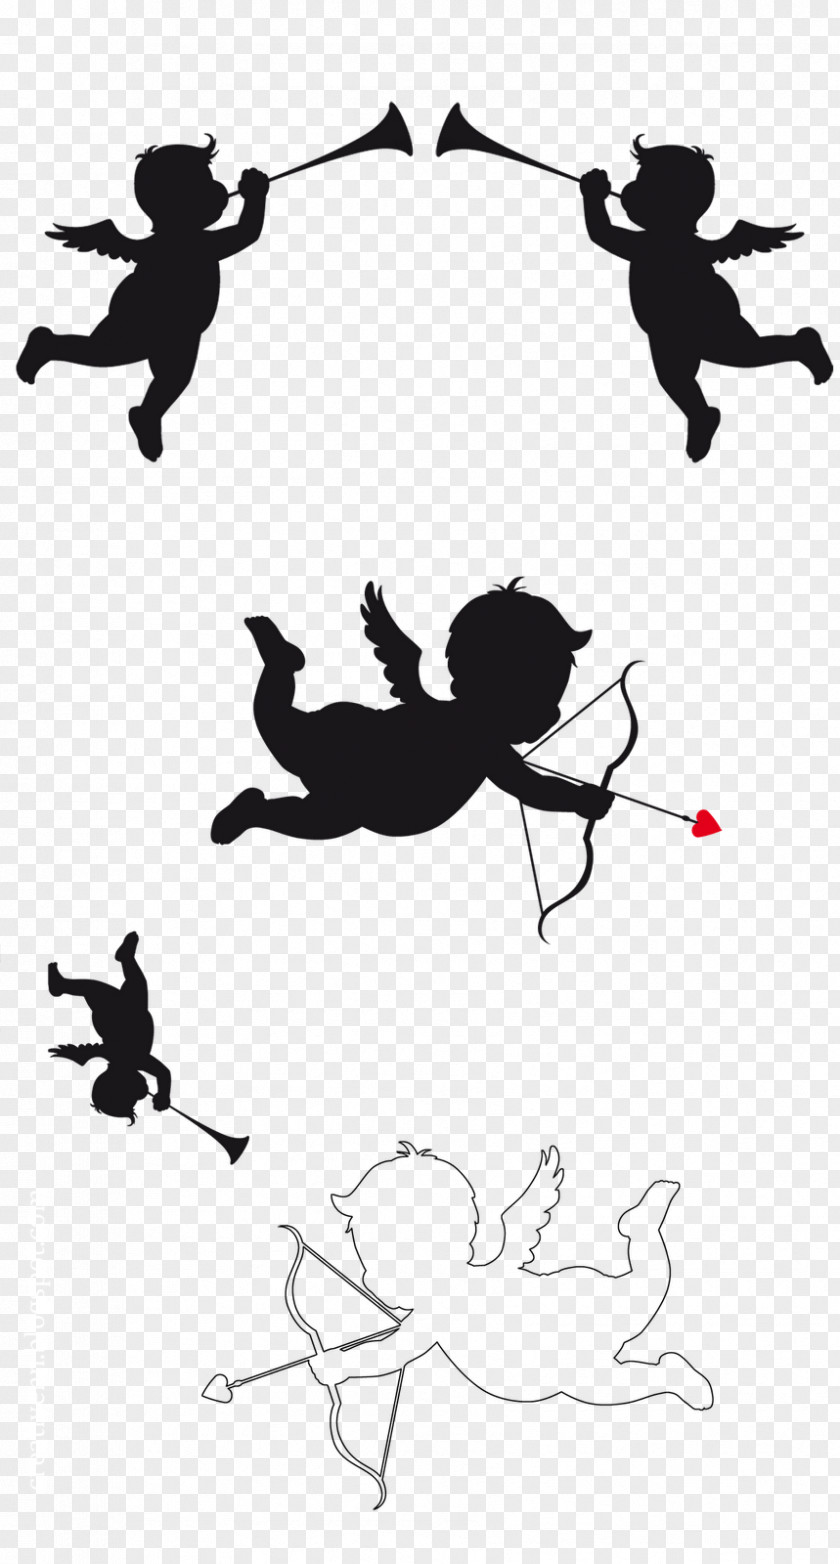 Cupid Vector And Psyche Silhouette PNG